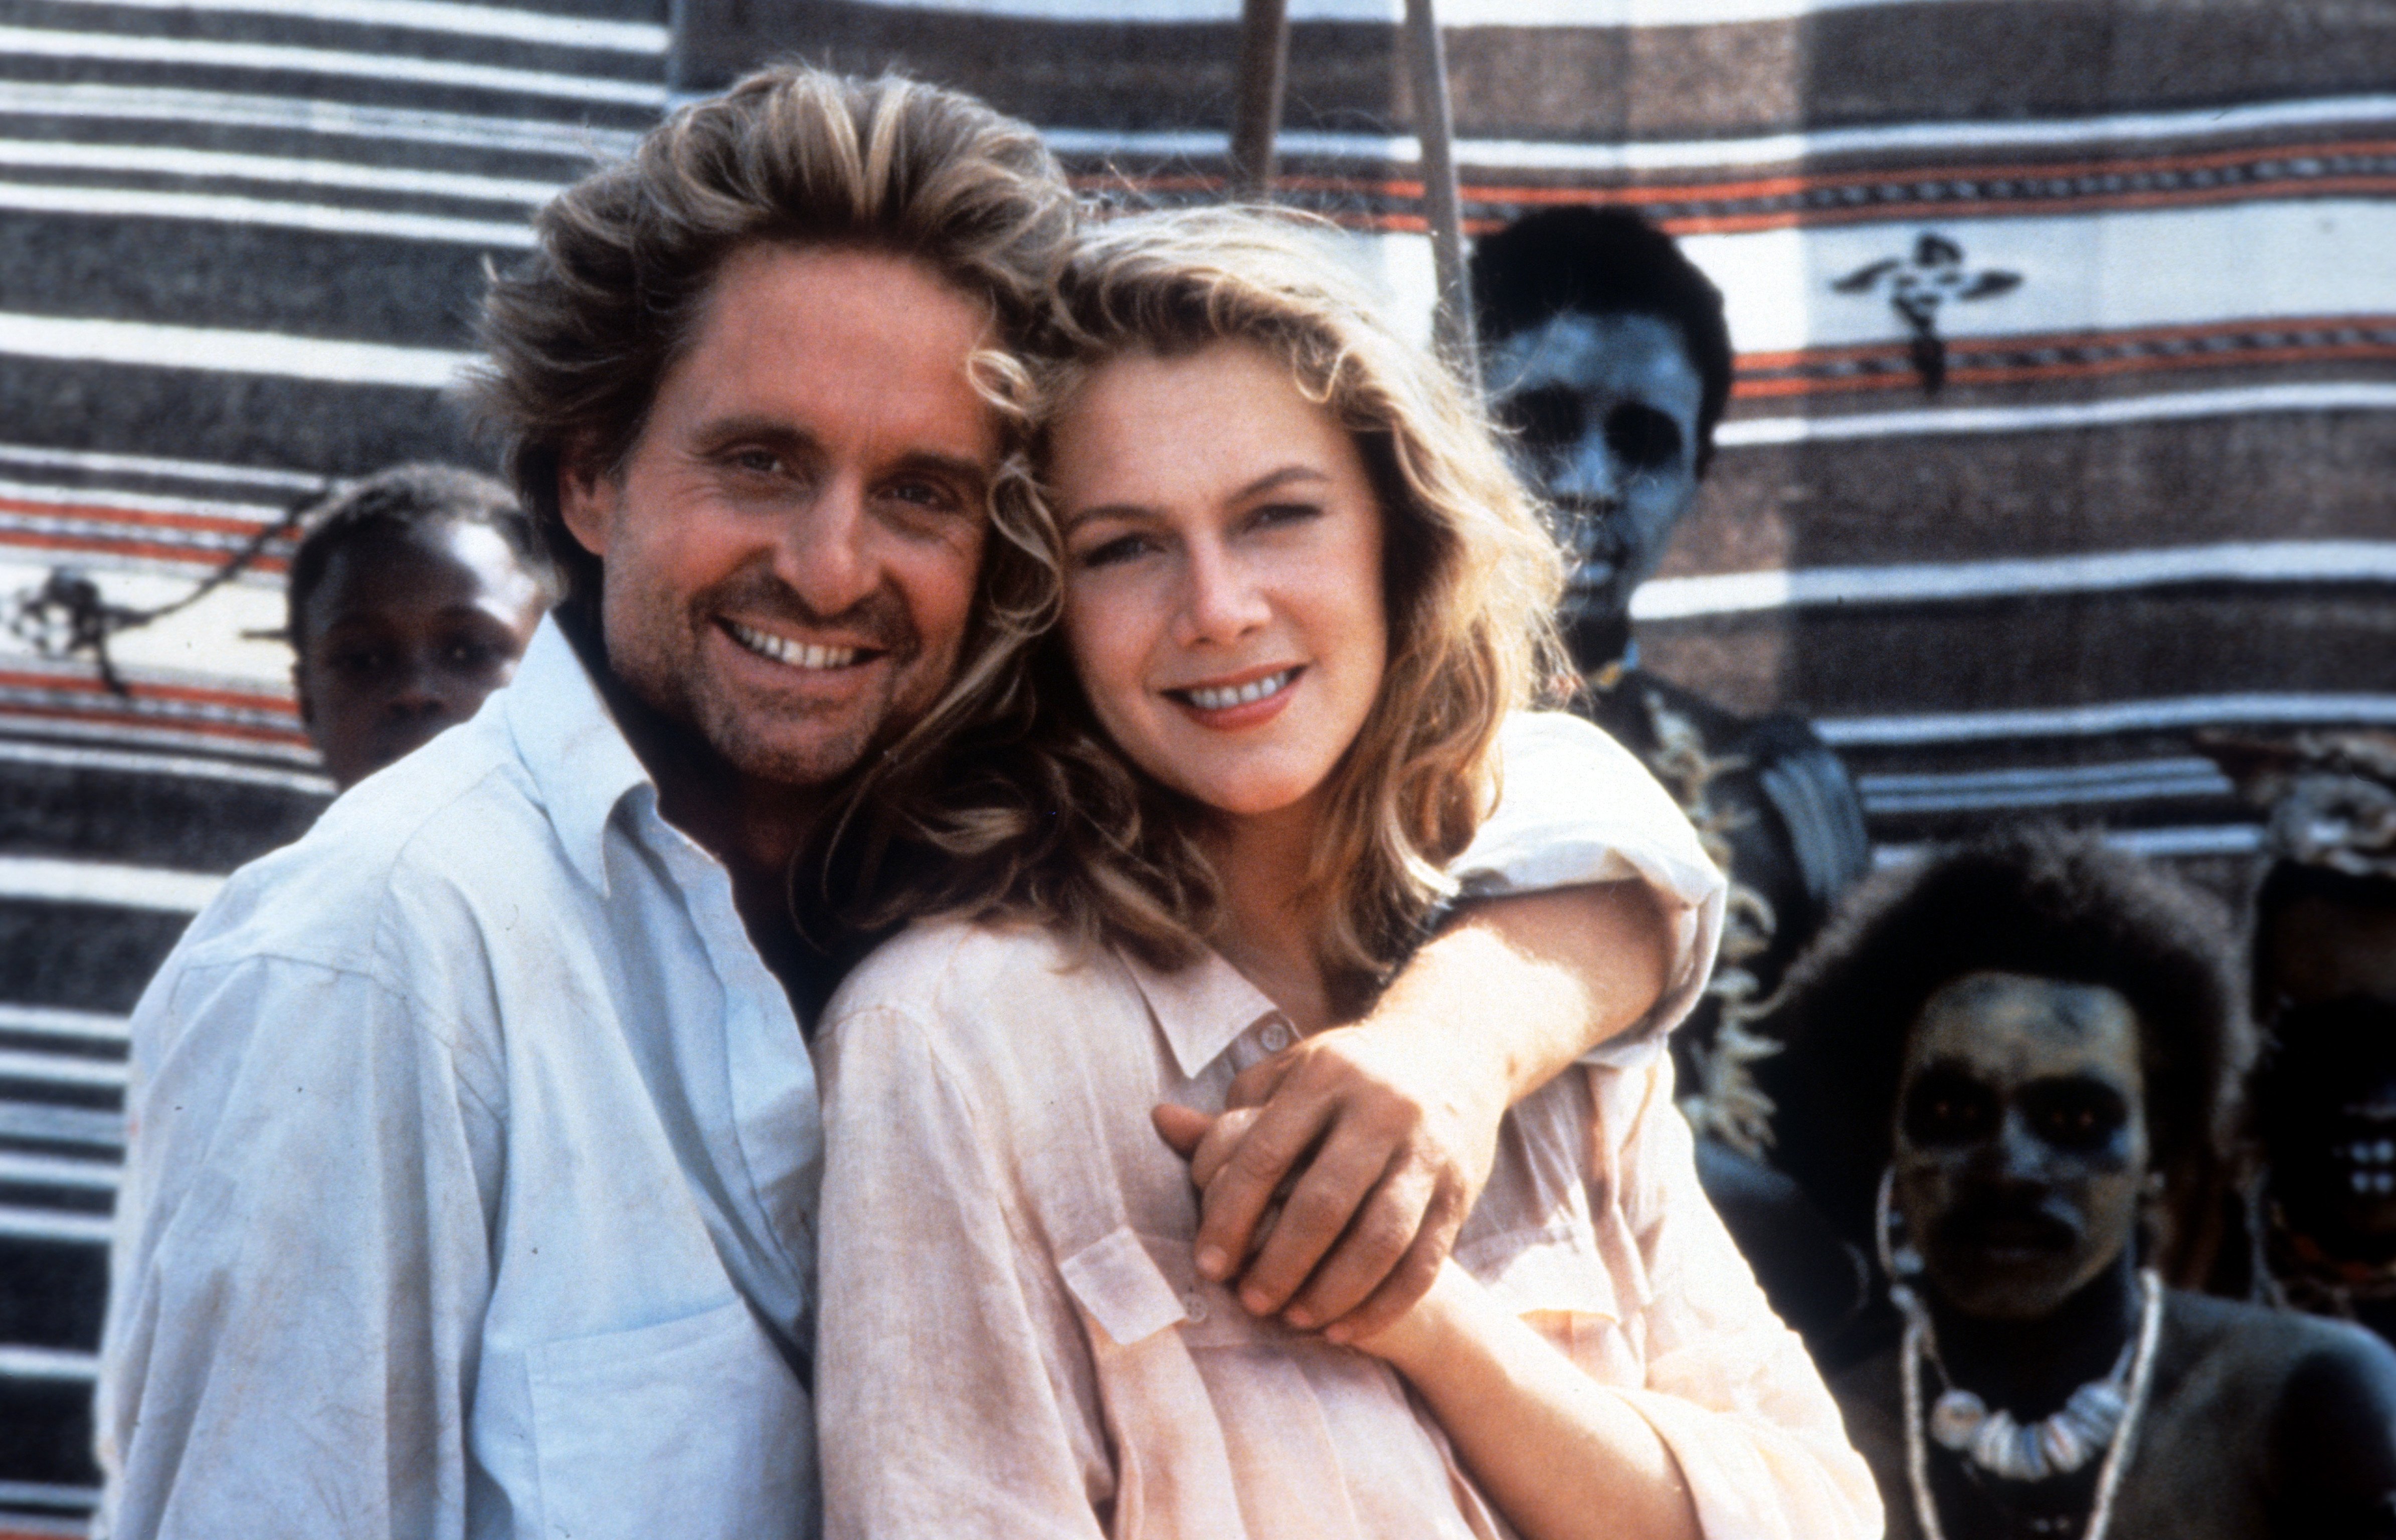 Michael Douglas and Kathleen Turner on set of the film 'The Jewel Of The Nile', 1985 | Source: Getty Images